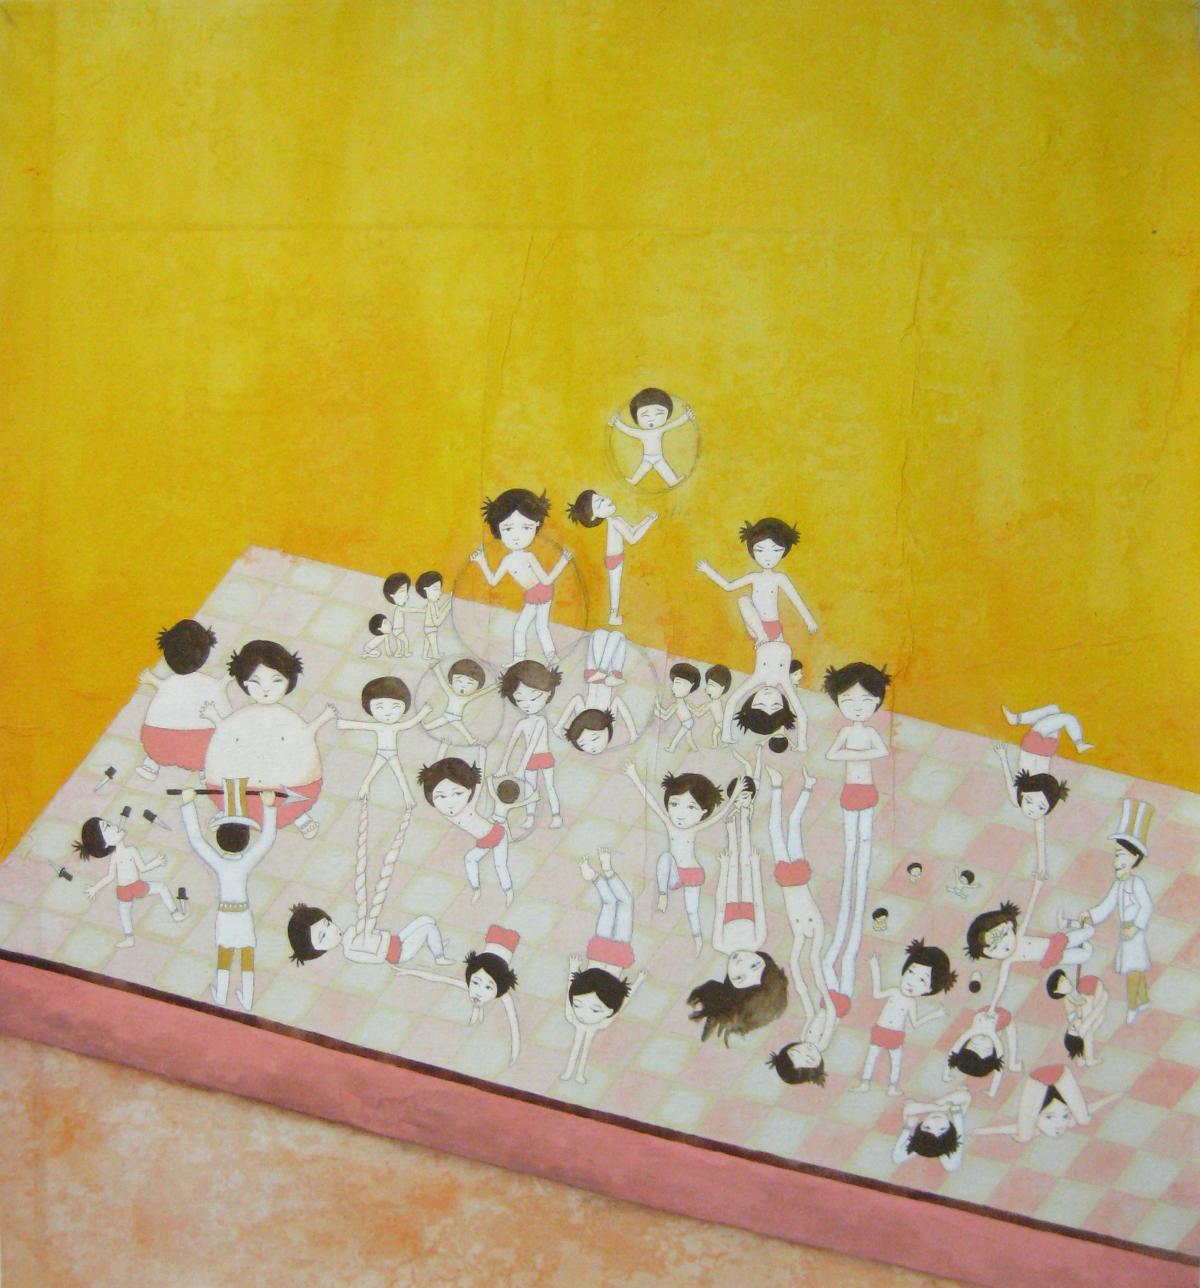 Artwork by Kyung Jeon titled Karnival Acrobats, 2009, Gouache, watercolor, graphite on rice paper on canvas, 31.75 x 29.375 inches, 80.6 x 74.6 cm